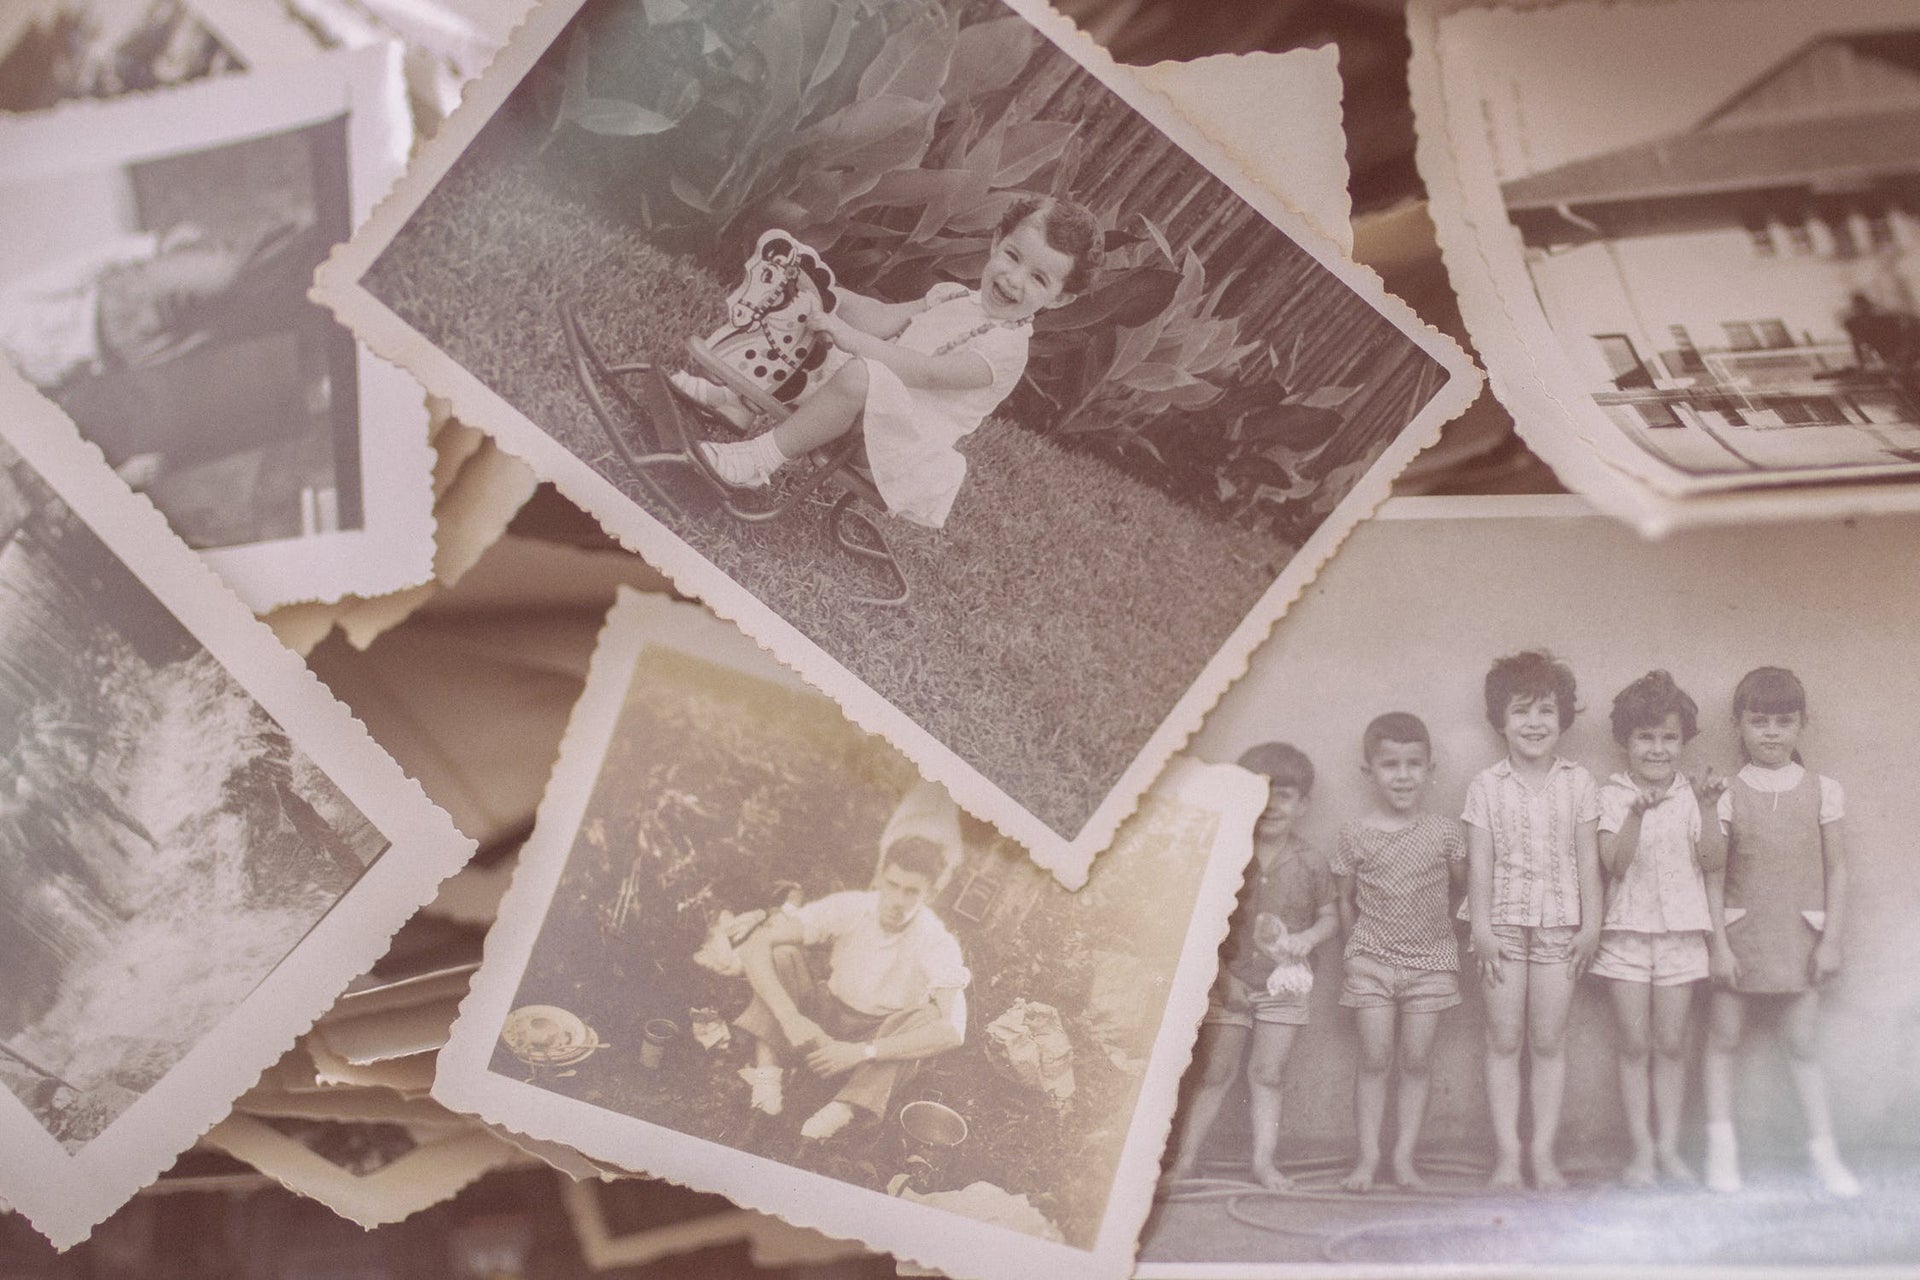 How to Restore Old Photos